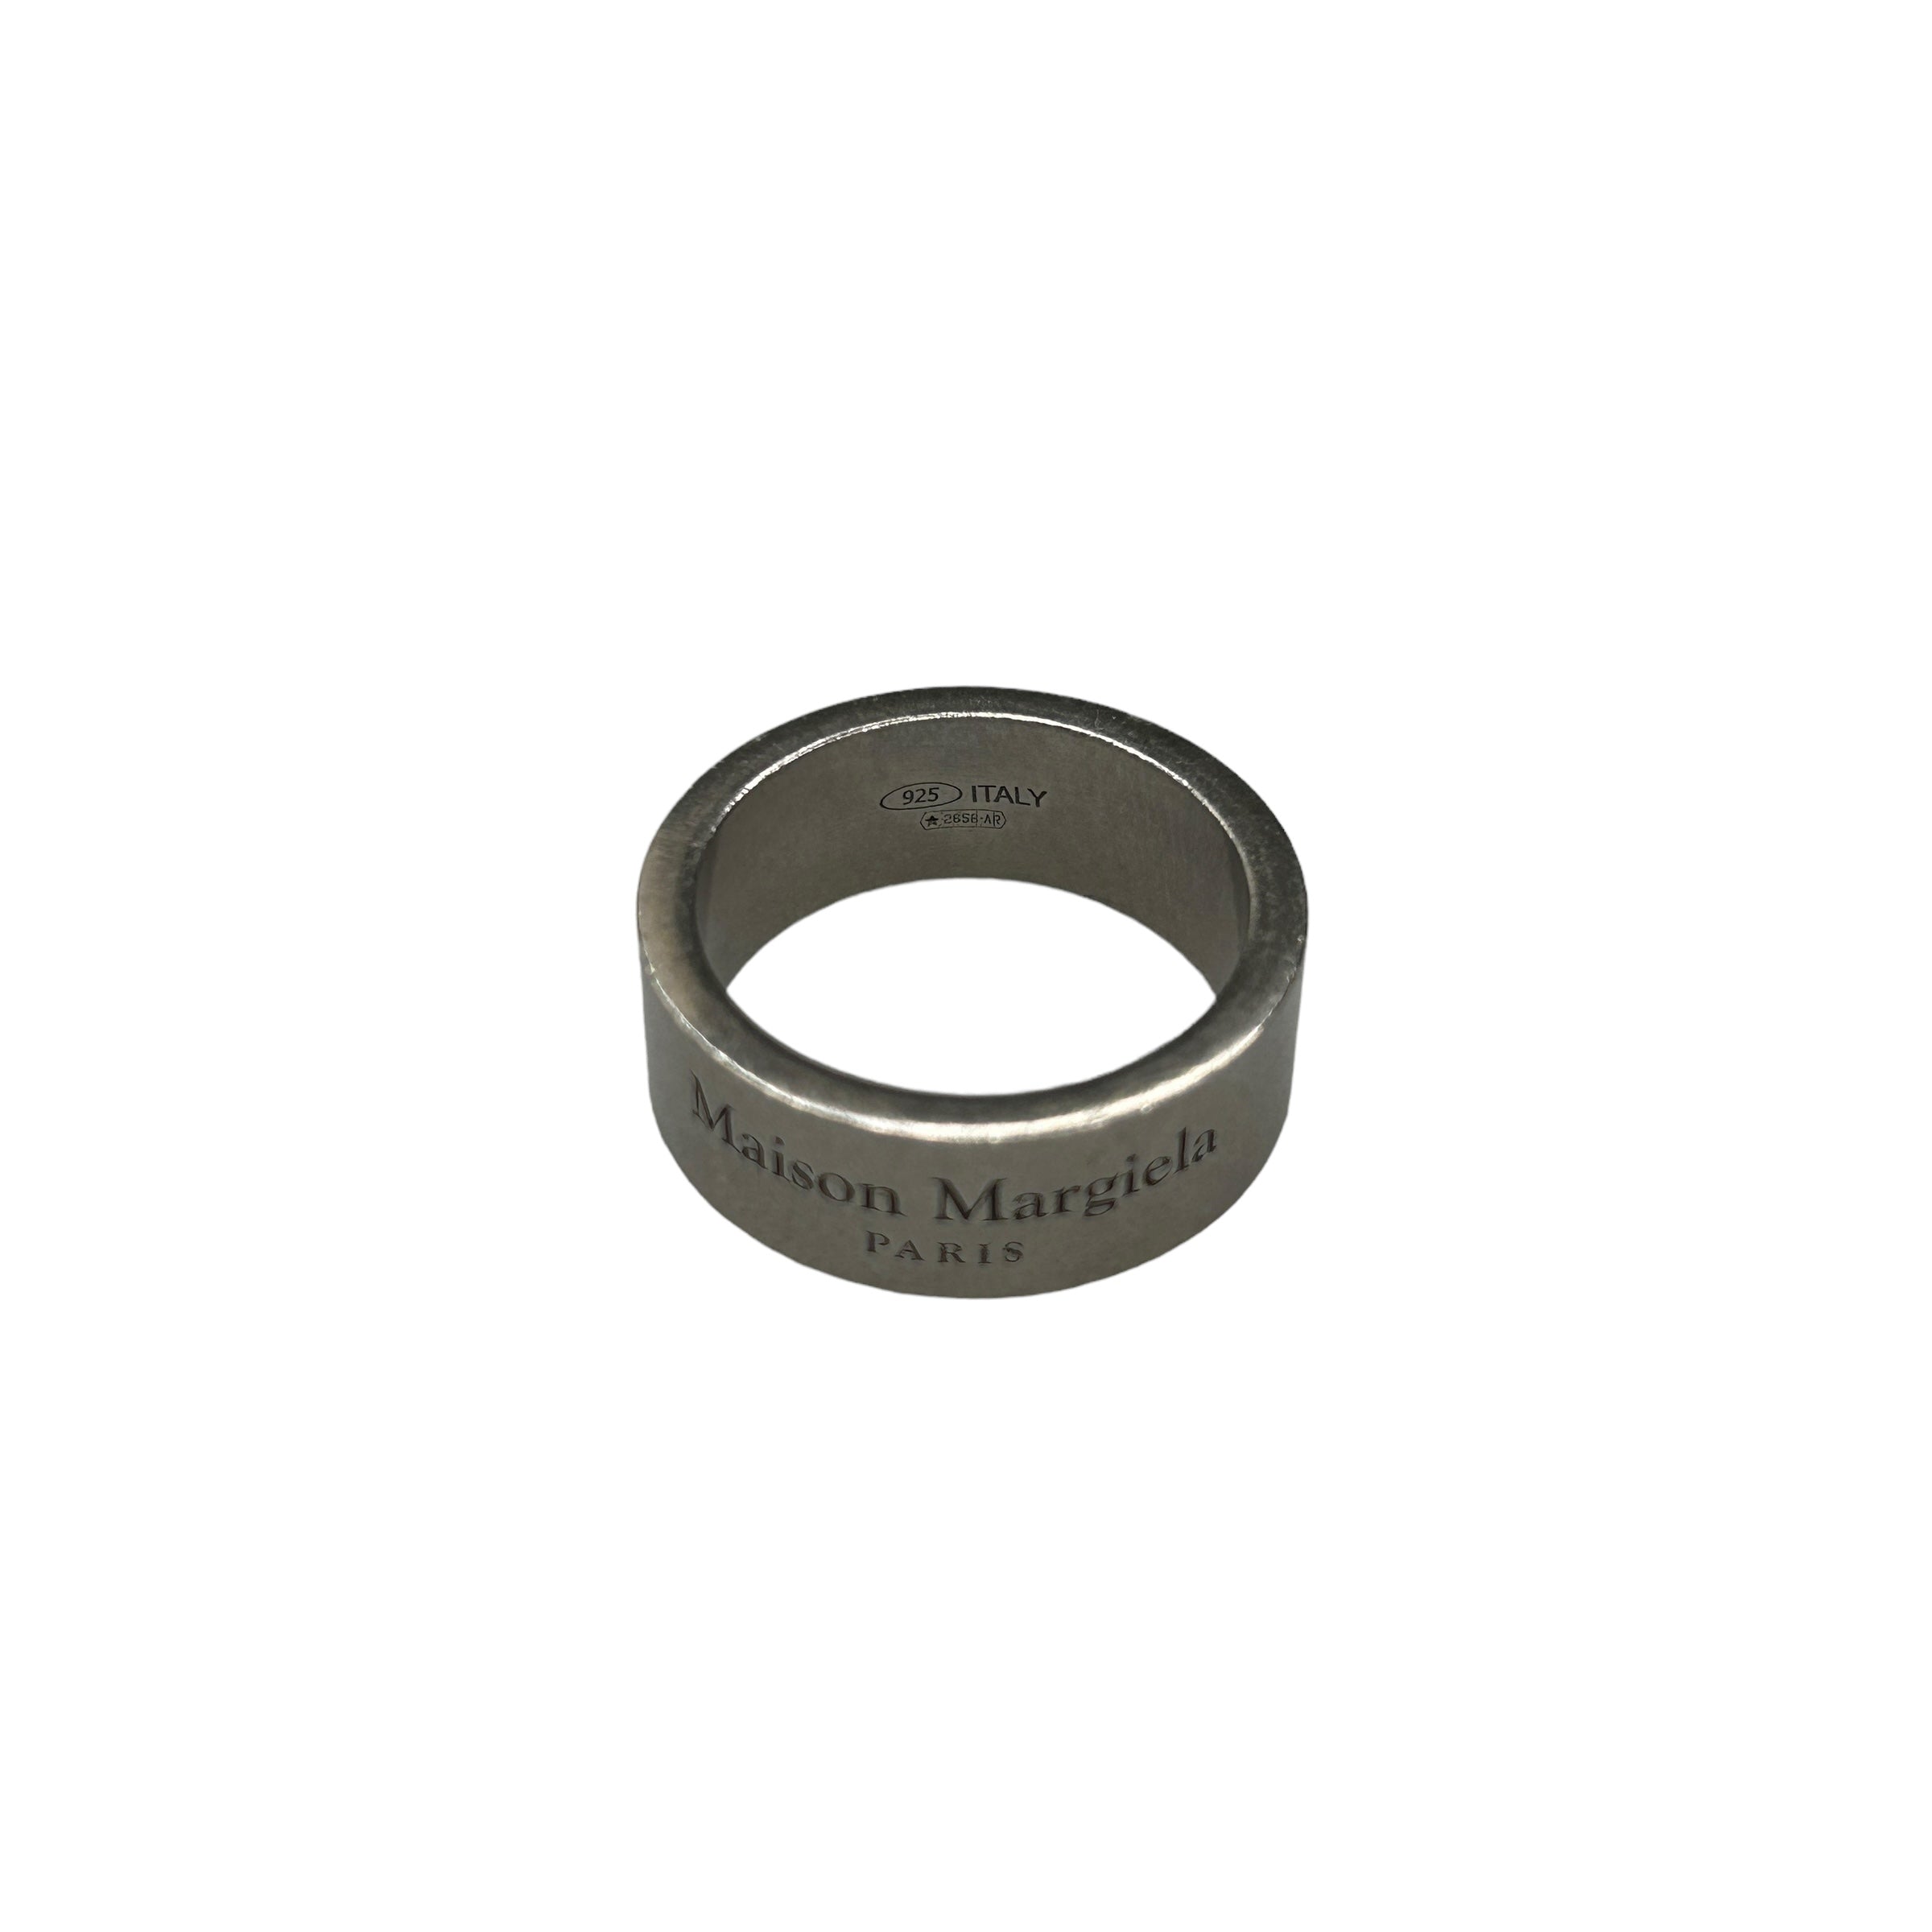 (8) MAISON MARGIELA ETCHED LOGO RING - 925 STERLING SILVER